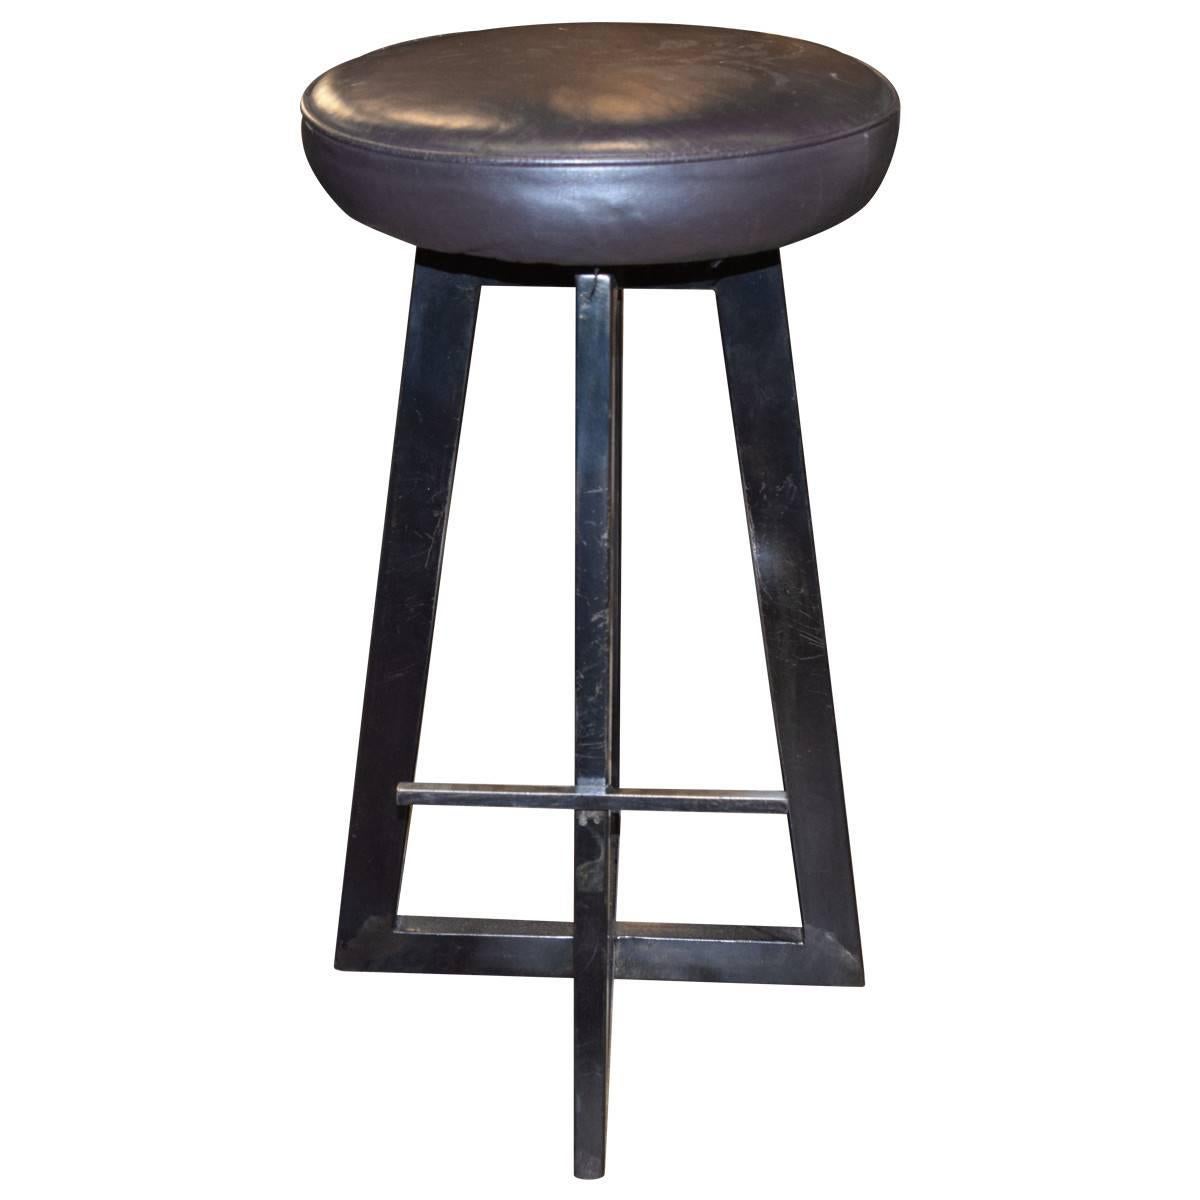 These vintage custom patinated iron stools stand on three legs and include a footrest. With leather-upholstered, swiveling seats, their clean, geometric lines would fit perfectly with a contemporary decorating scheme. Sold as a set of two.